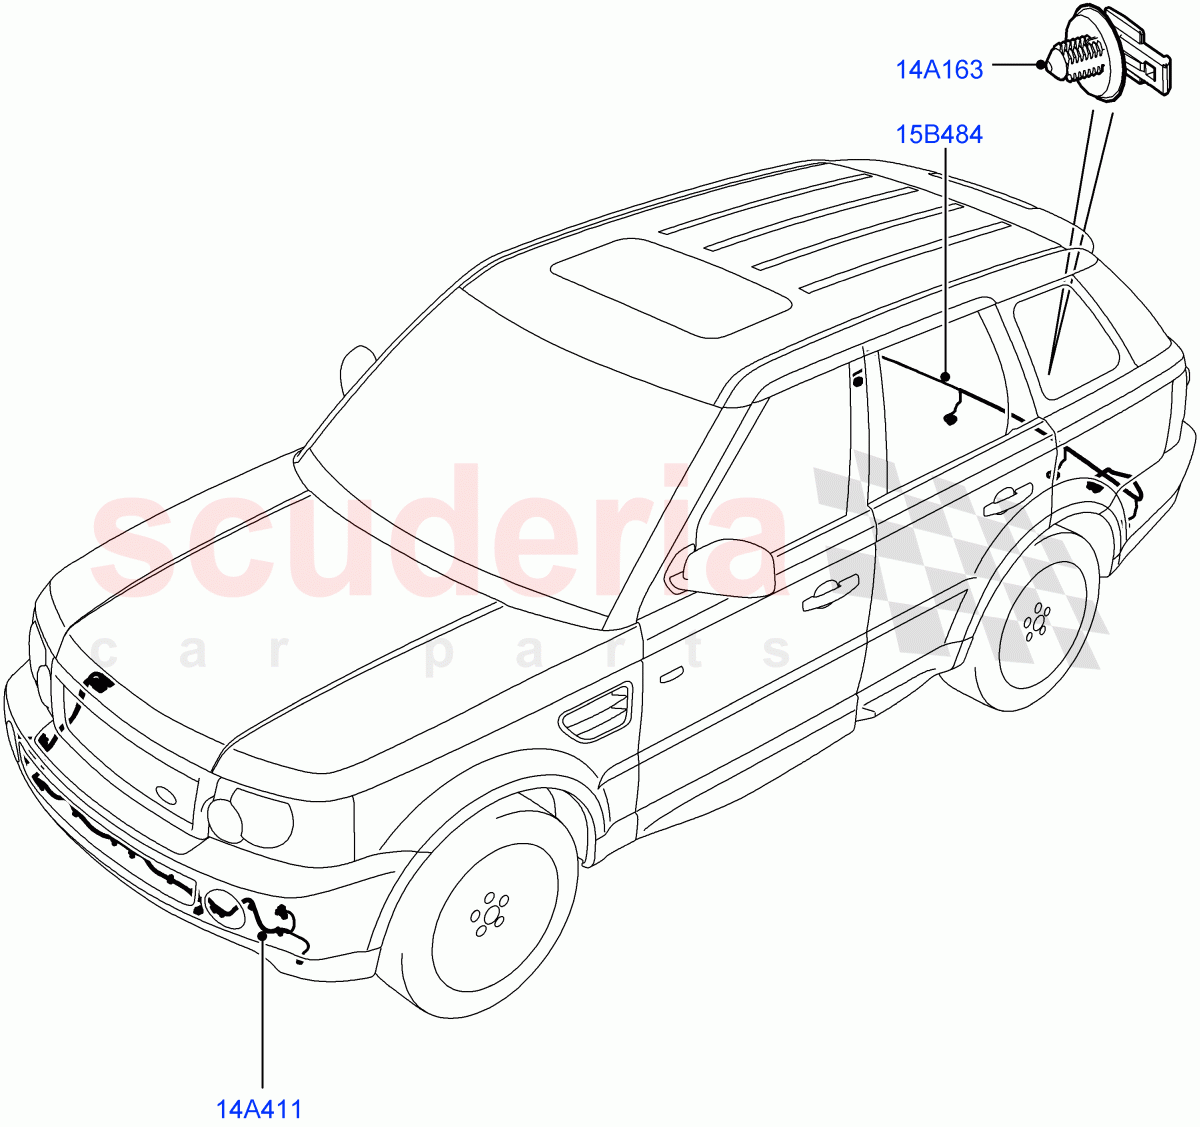 Electrical Wiring - Body And Rear(Bumper)((V)FROMAA000001) of Land Rover Land Rover Range Rover Sport (2010-2013) [5.0 OHC SGDI SC V8 Petrol]